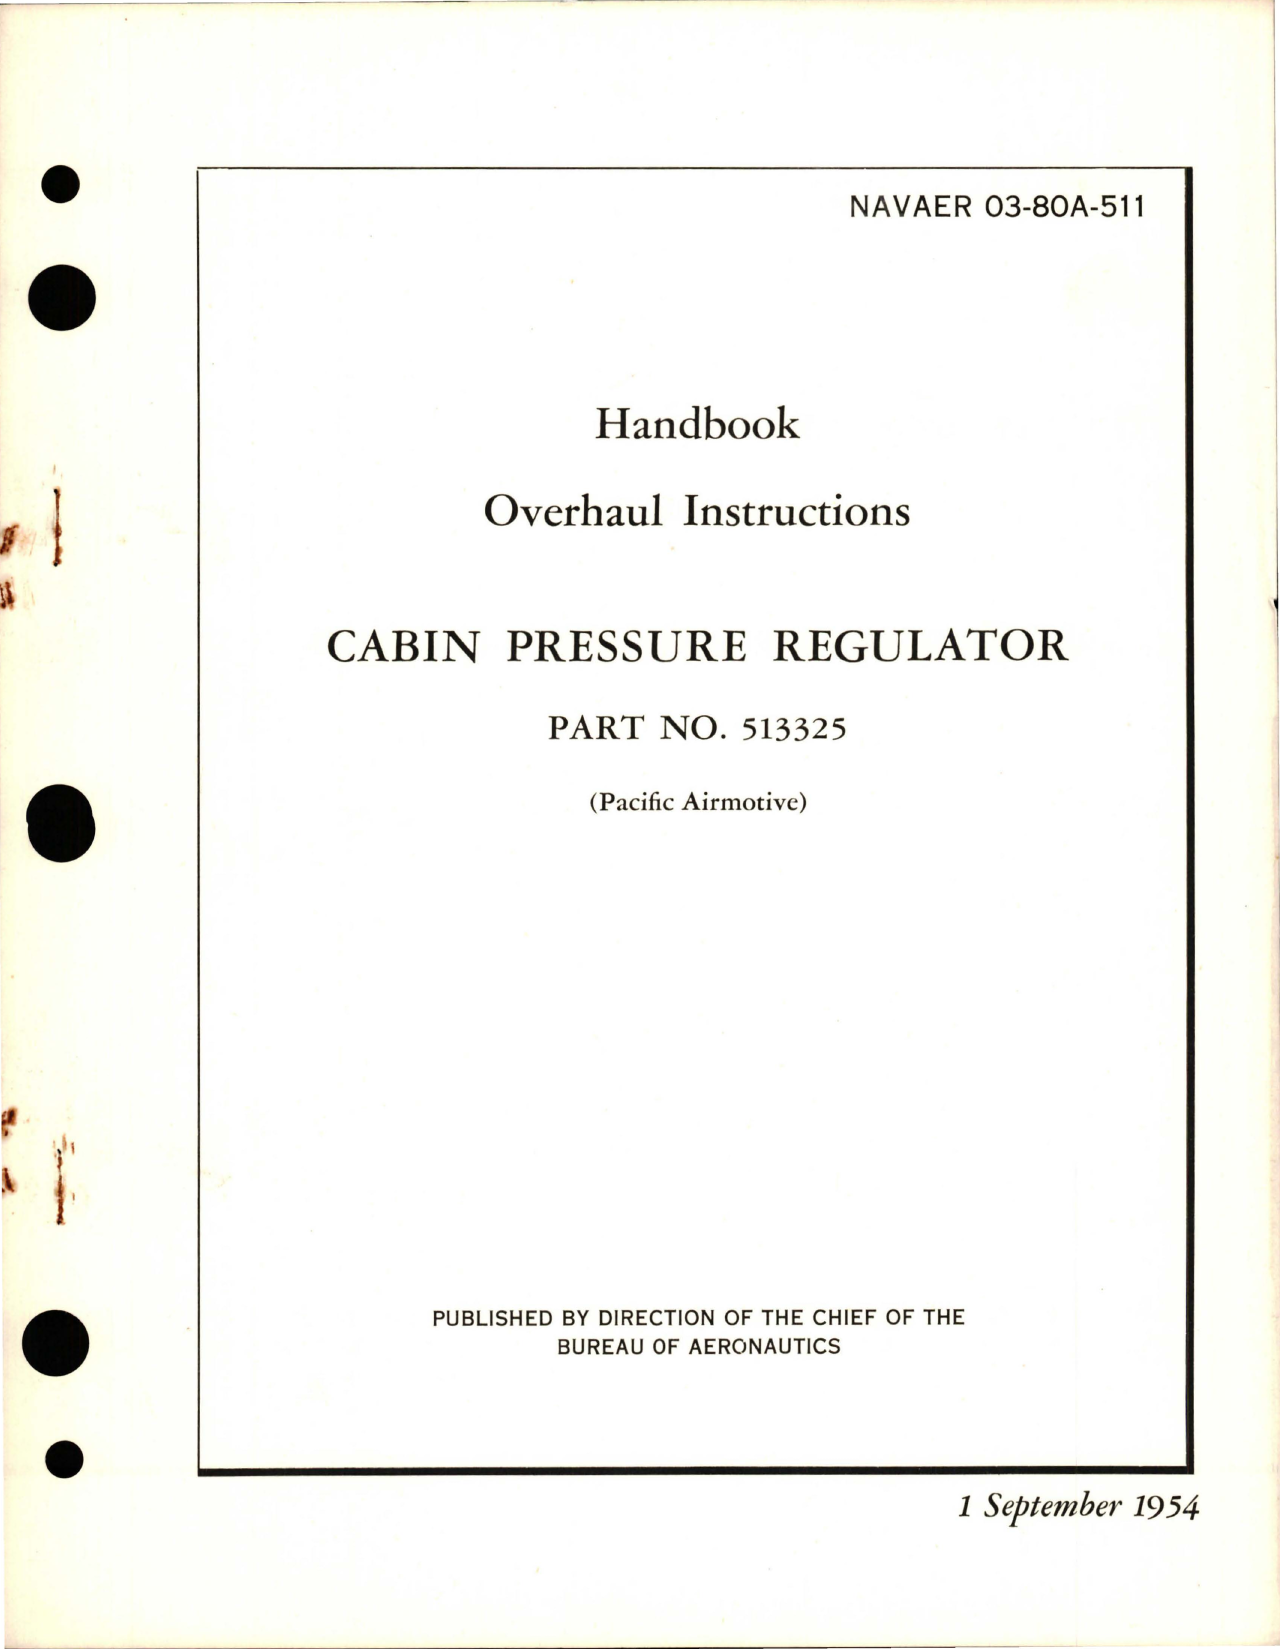 Sample page 1 from AirCorps Library document: Overhaul Instructions for Cabin Pressure Regulator - Part 513325 